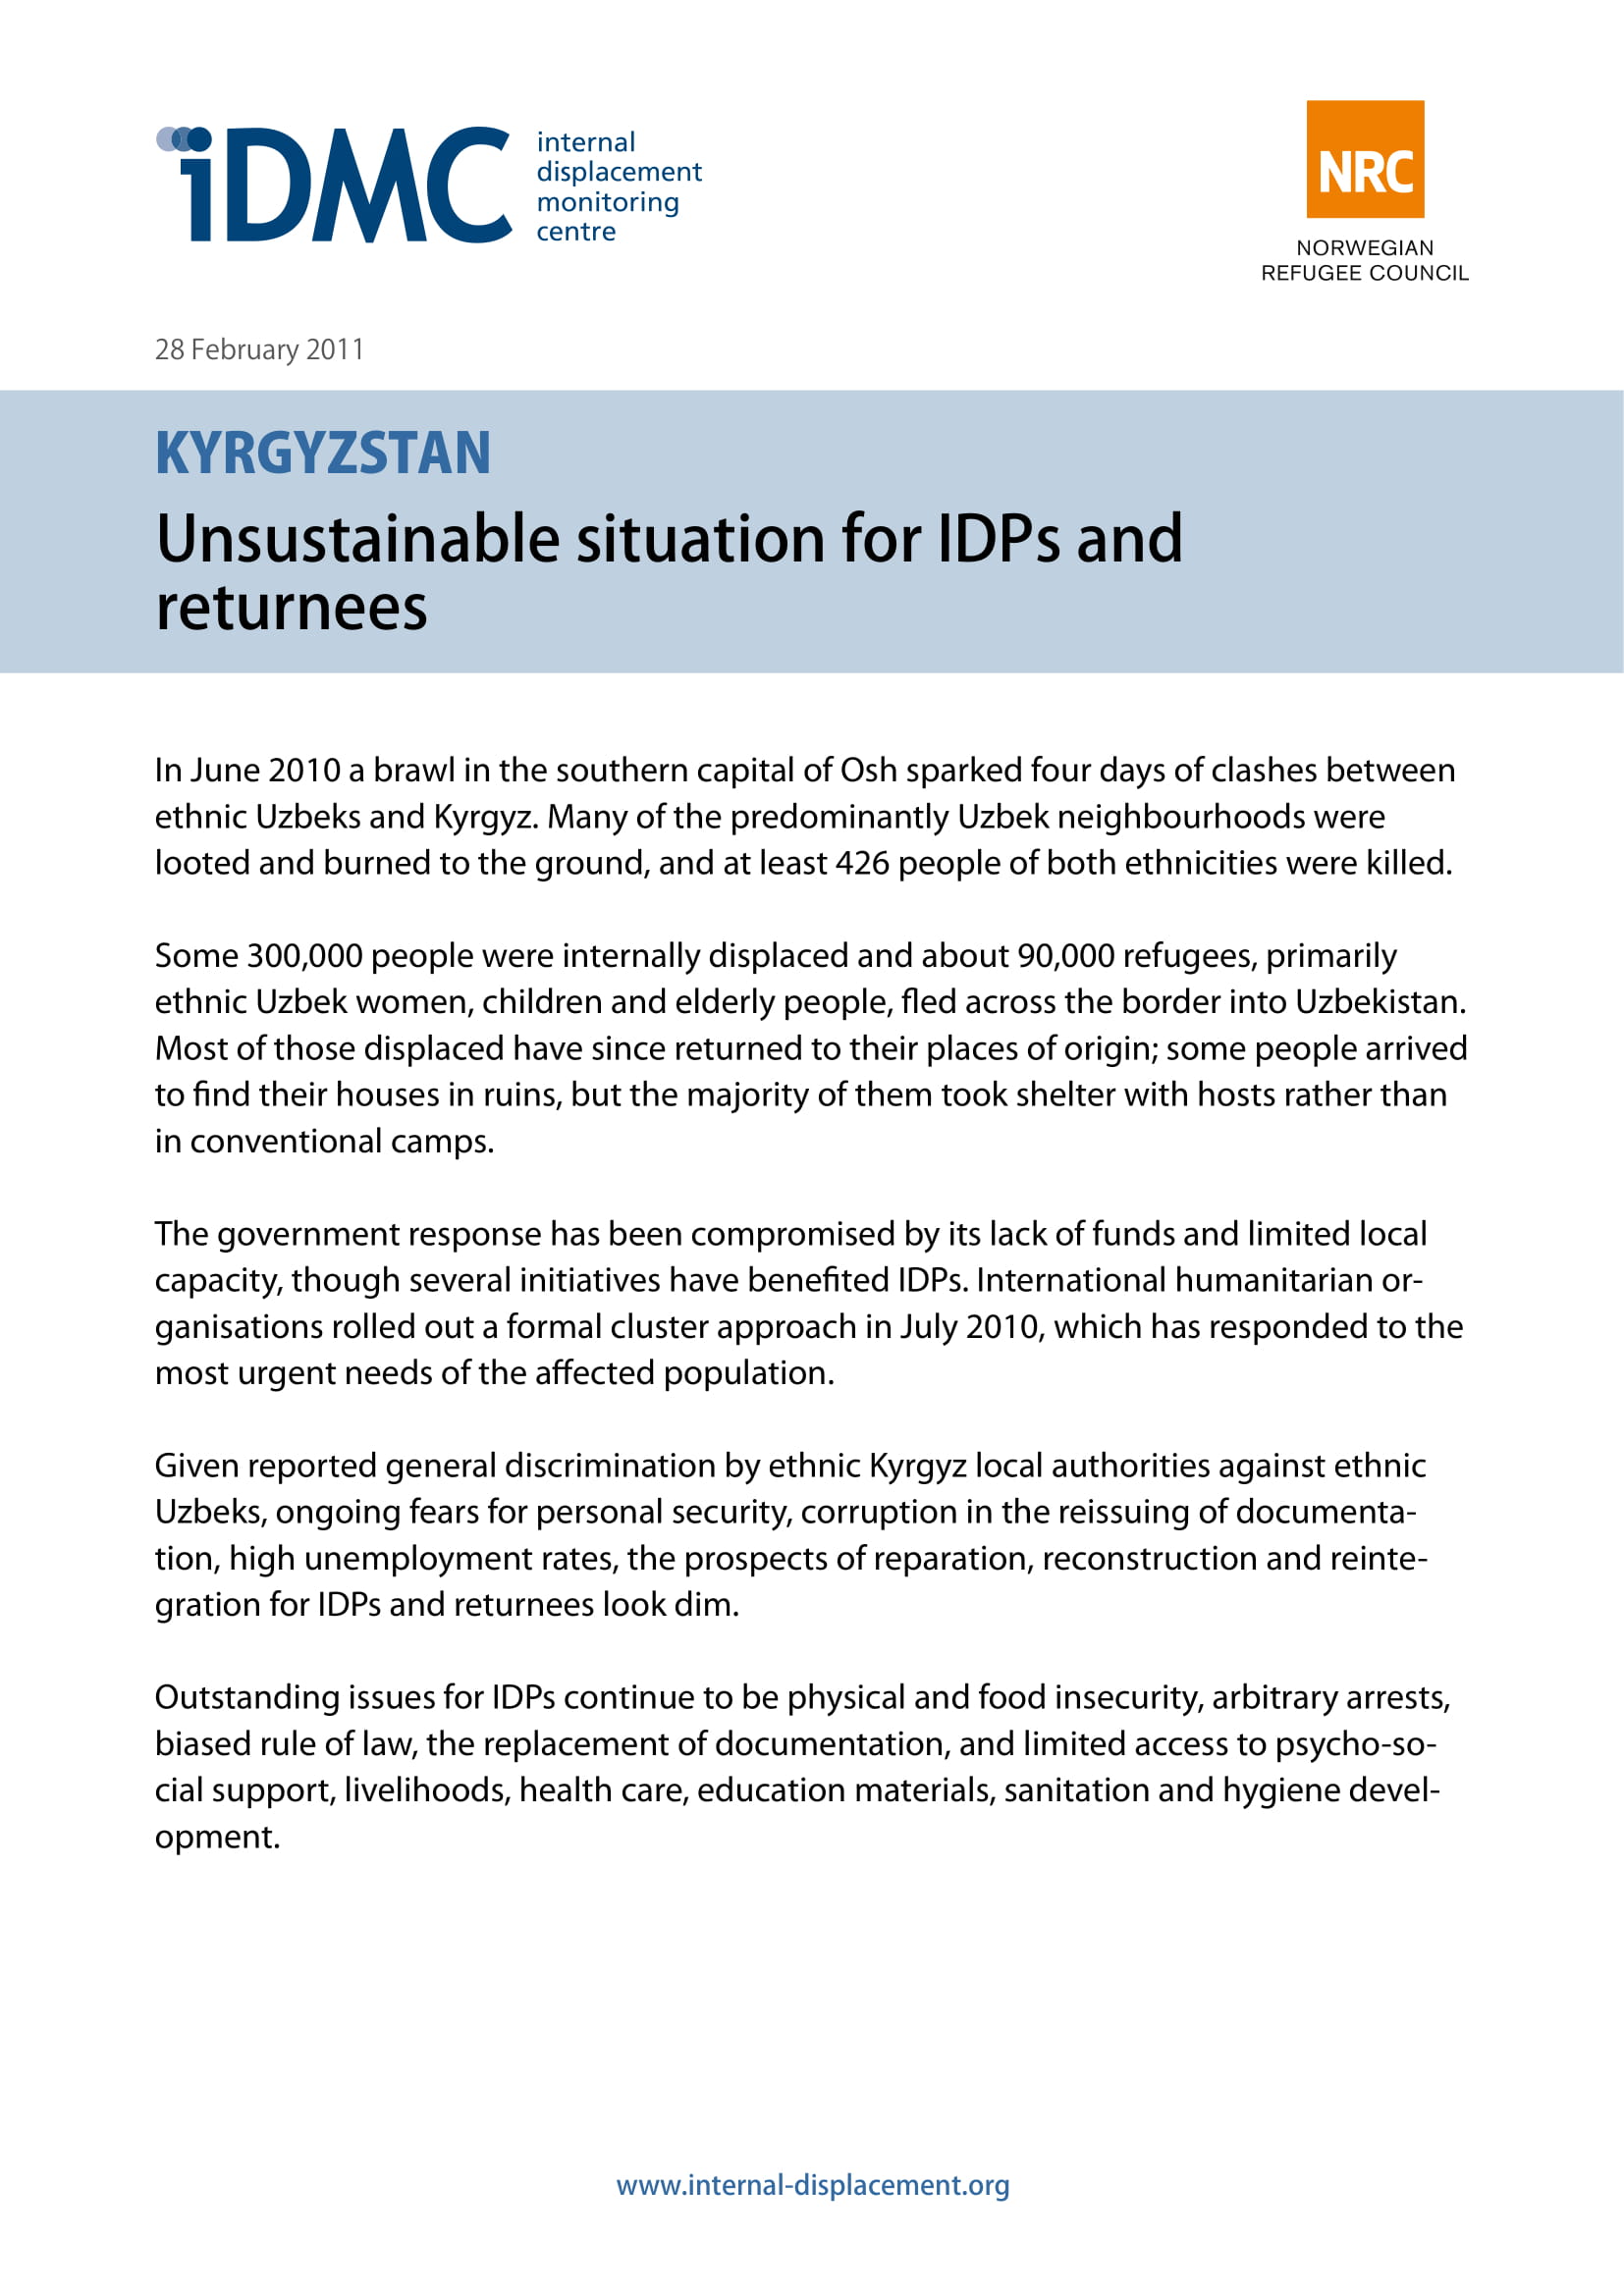 Kyrgyzstan: Unsustainable situation for IDPs and returnees